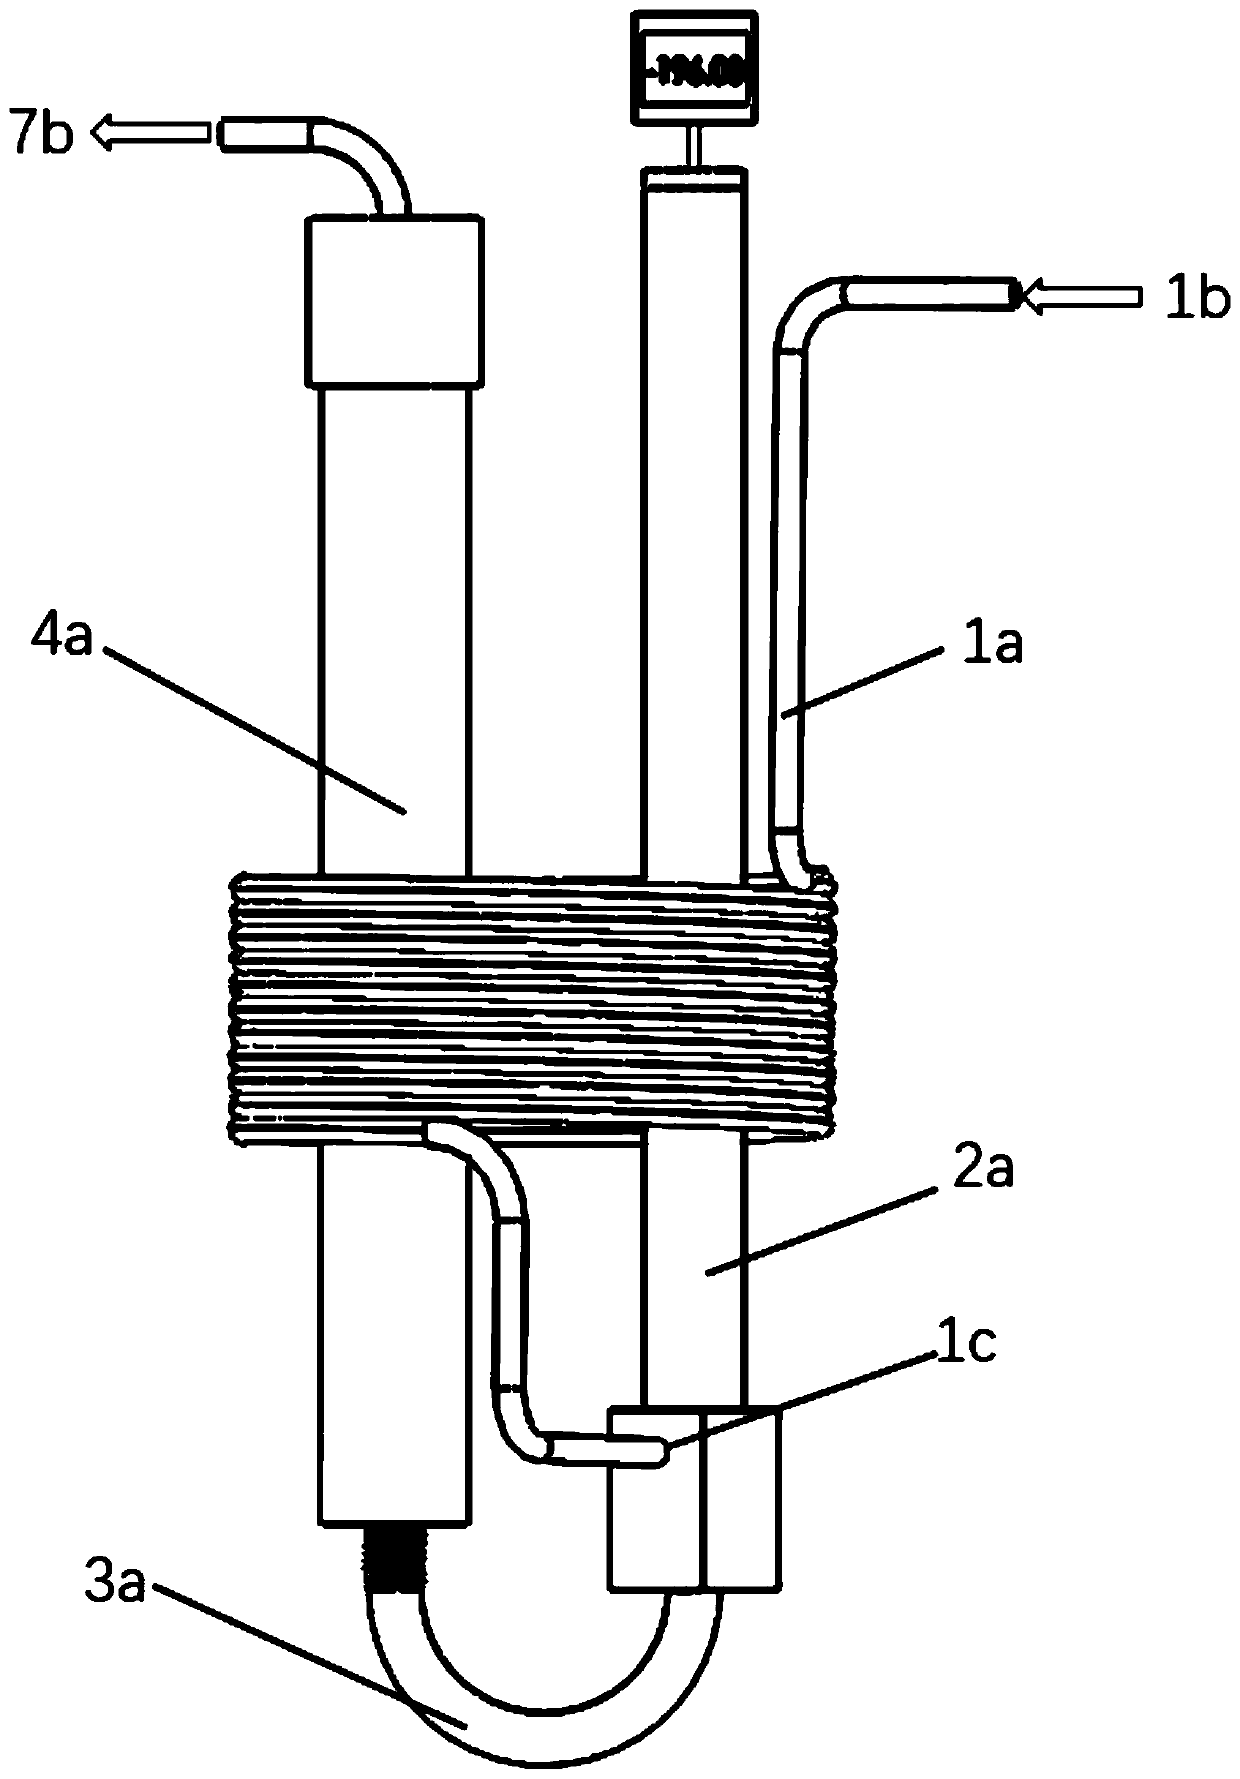 Parahydrogen enrichment device suitable for high-flow and high-pressure conditions